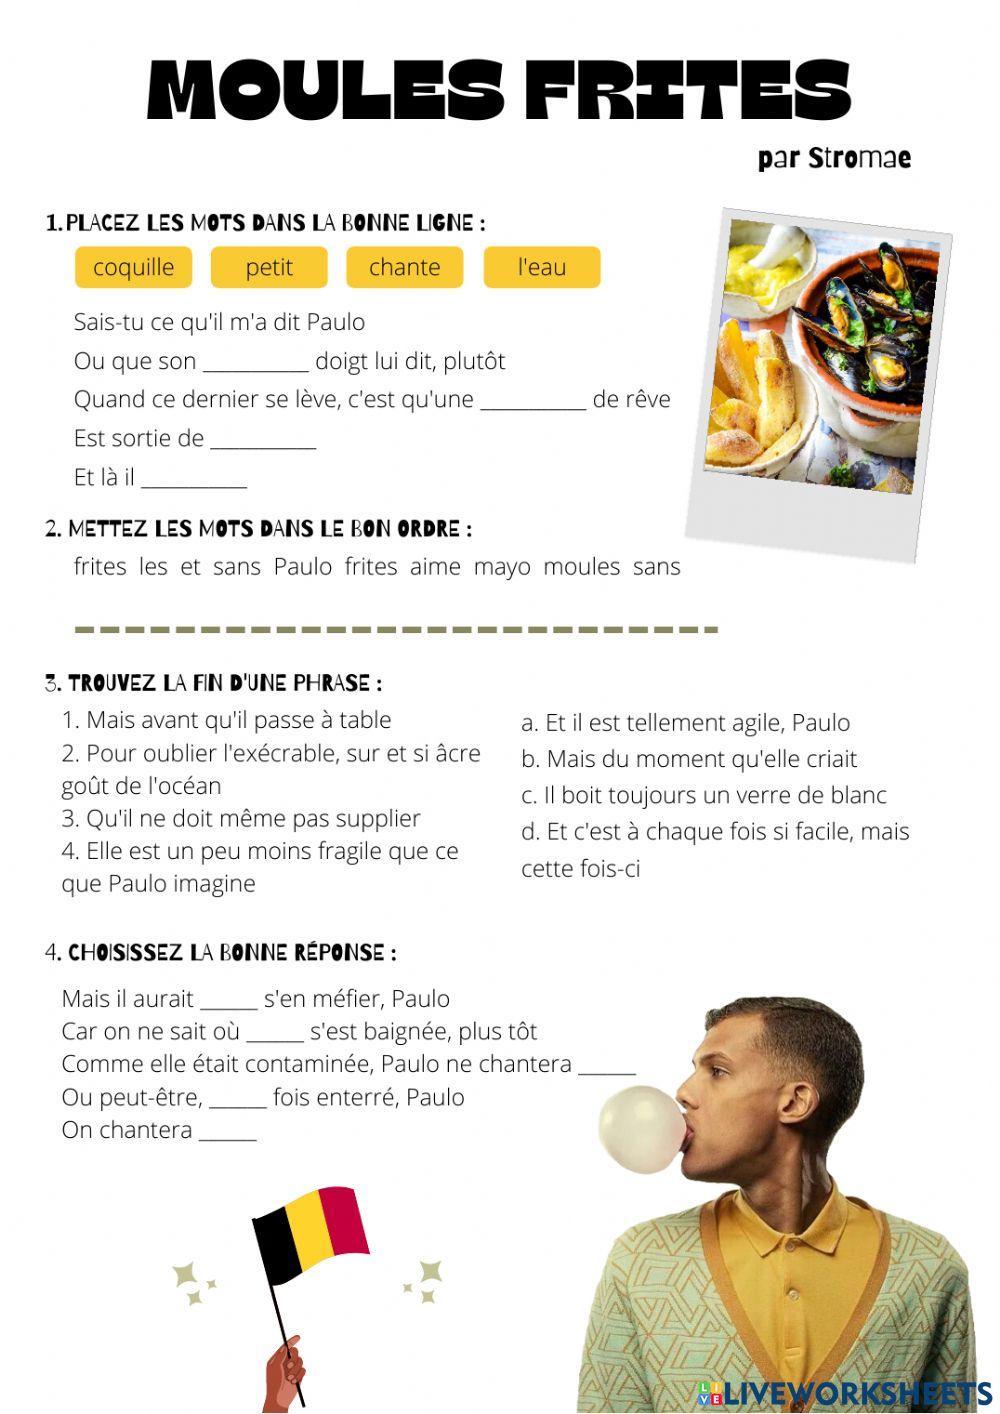 Stromae – Moules frites